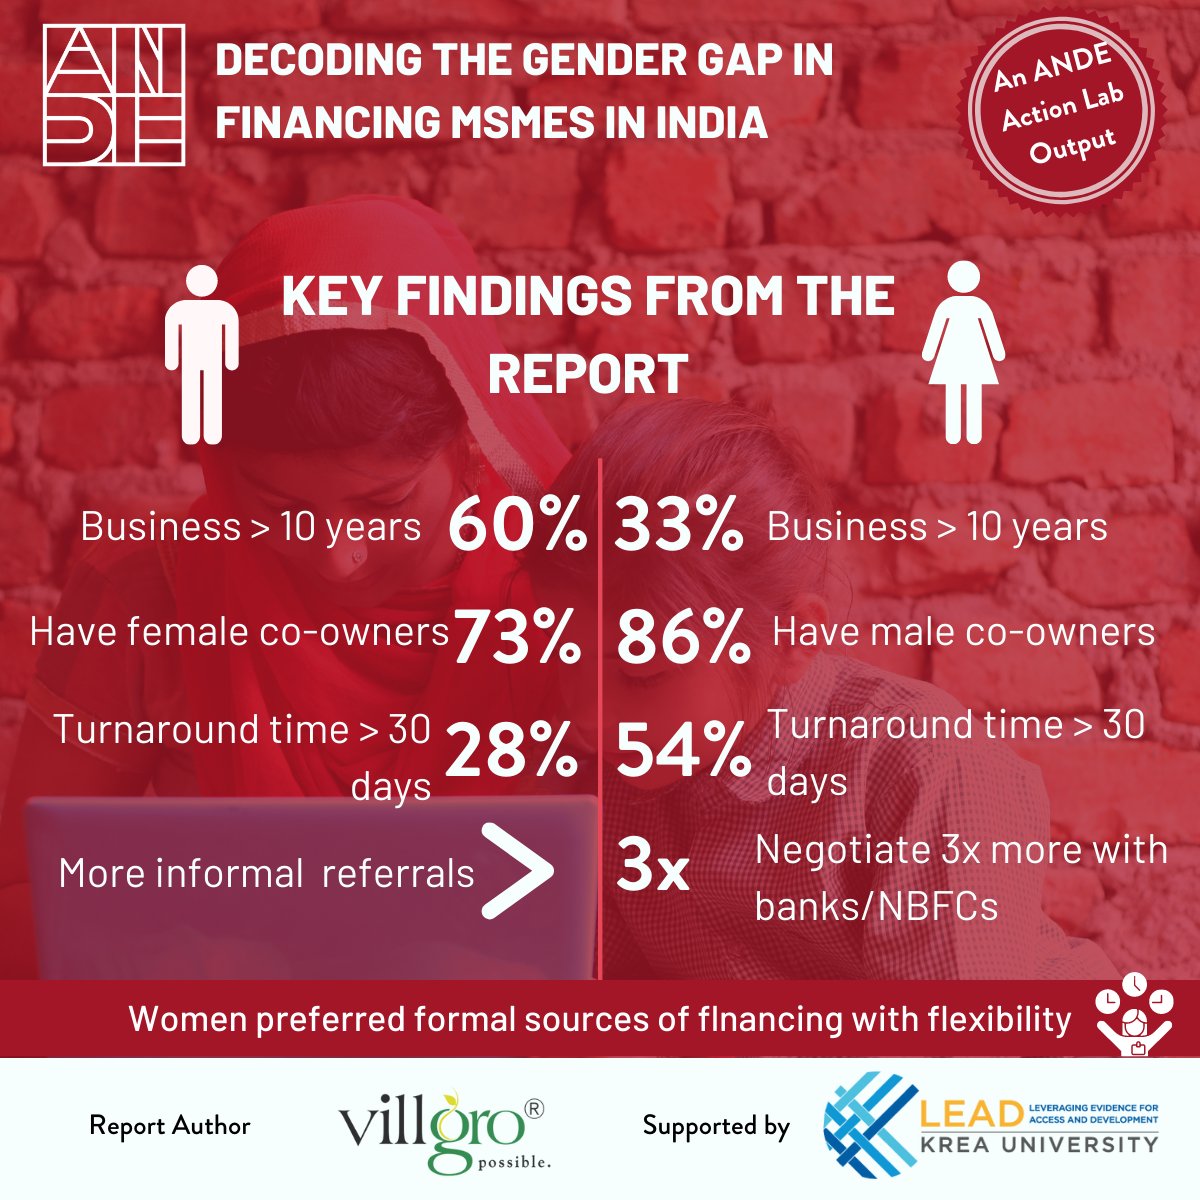 #ICYMI 
An output of @ANDEIndia's Gender Action Lab, 'Decoding the Gender Gap in Financing MSMEs in India - Looking Beyond the Numbers' was launched last week!

#HotOffThePress #NewReport #WomenLedBusiness #AccessToFinance

Link to report in thread ⬇️